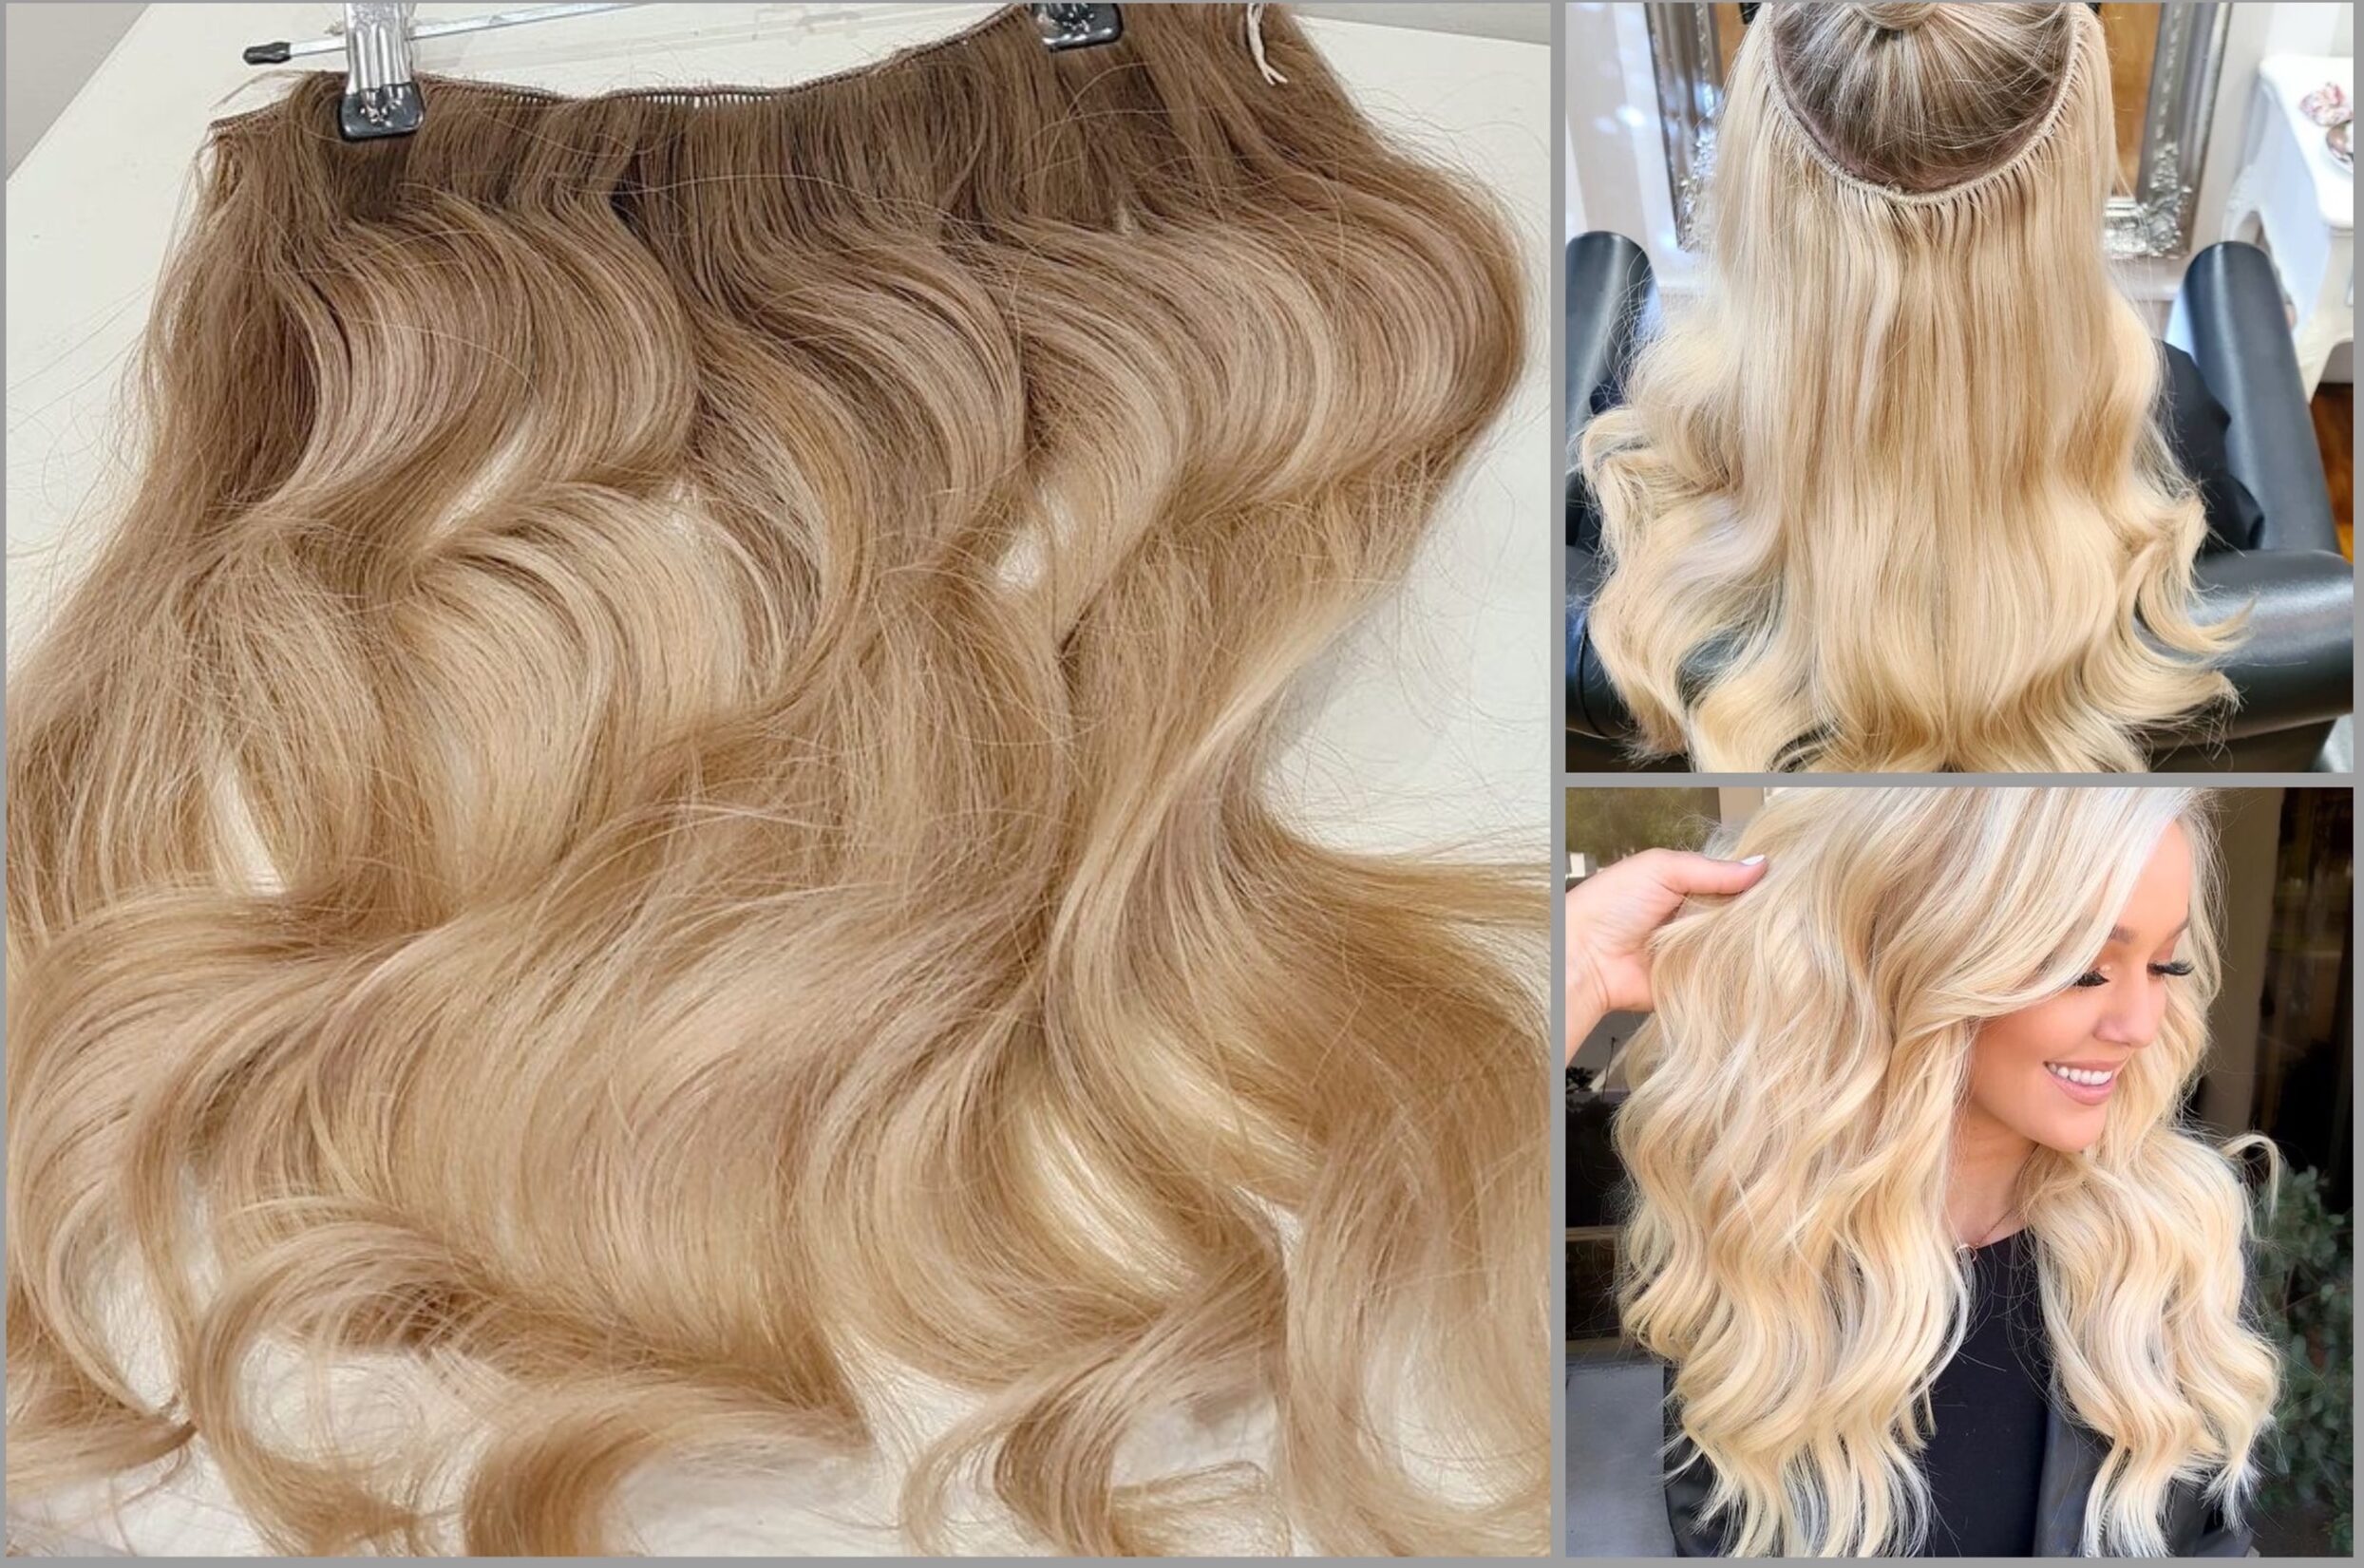 Chinese Hair Extensions: Top 3 best factories in China